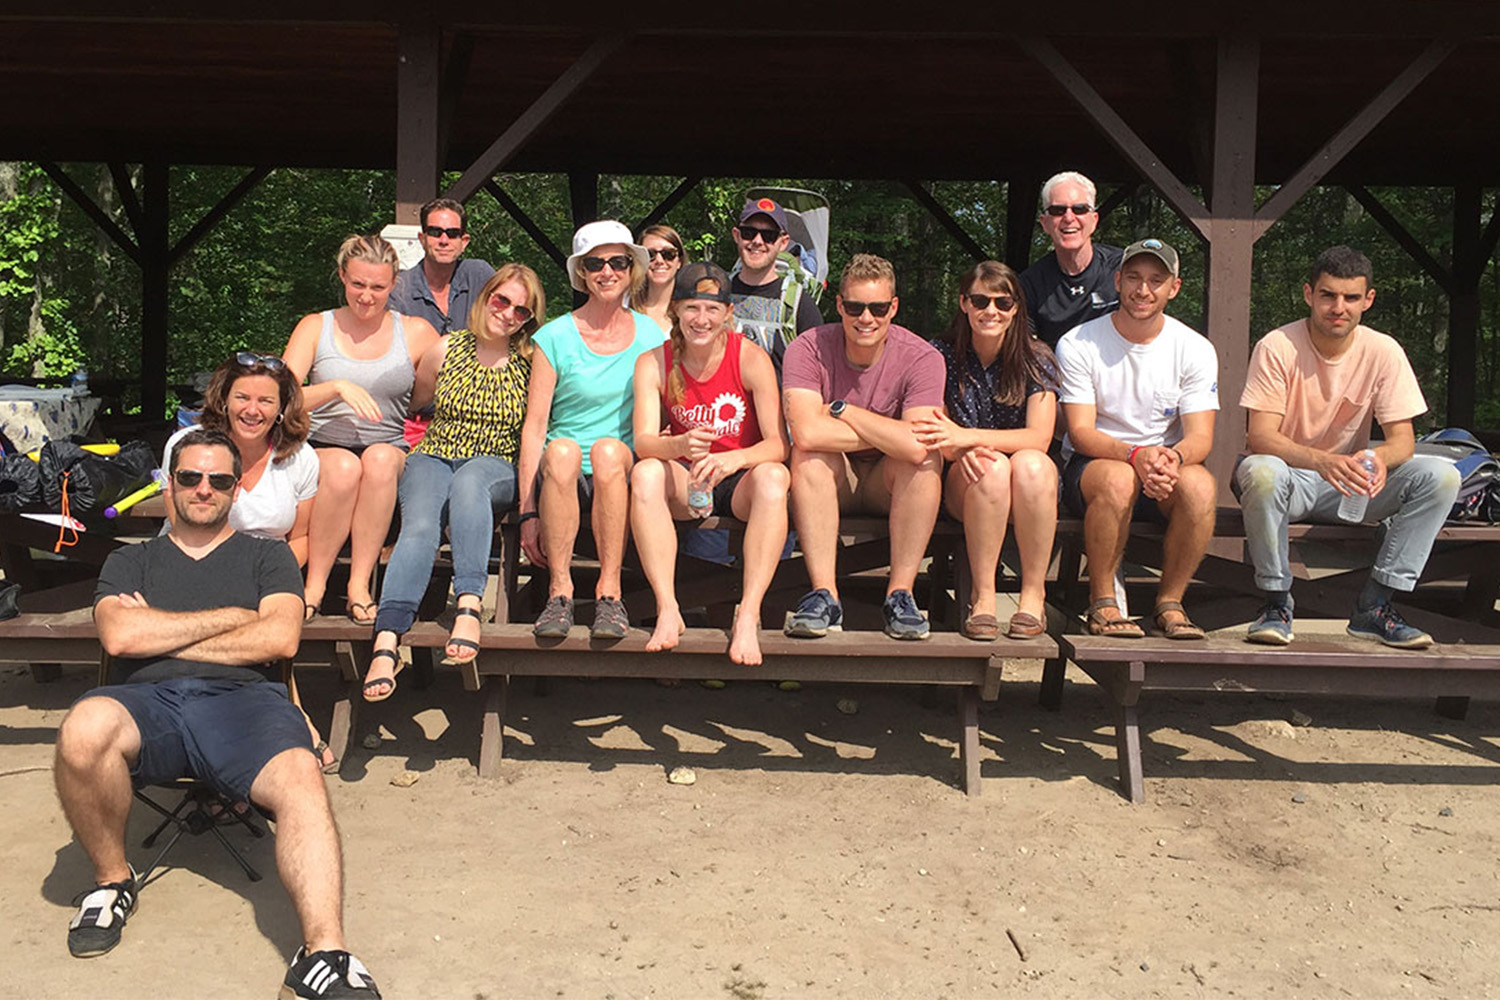 Group of Tocci staff sitting under a wooden overhang during a summer barbeque